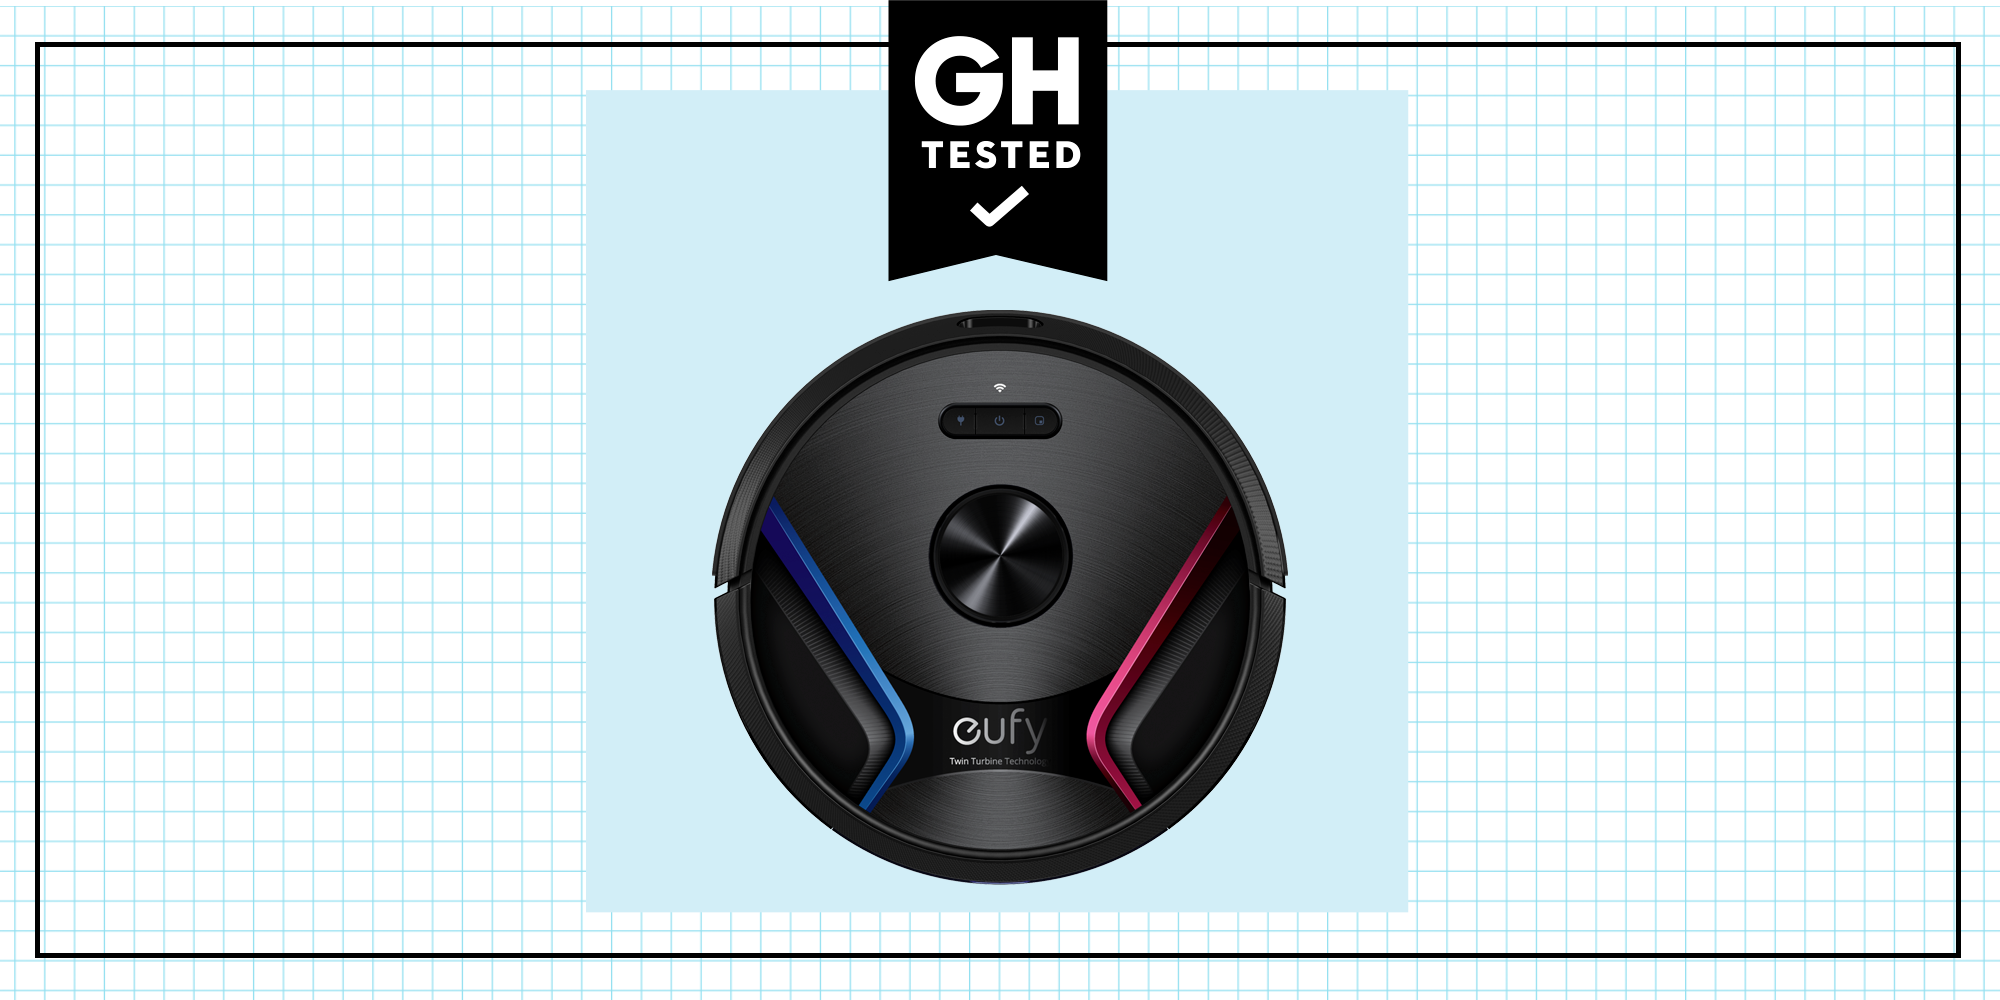 https://hips.hearstapps.com/hmg-prod/images/gh-tested-robo-vac-x8-1637694339.png